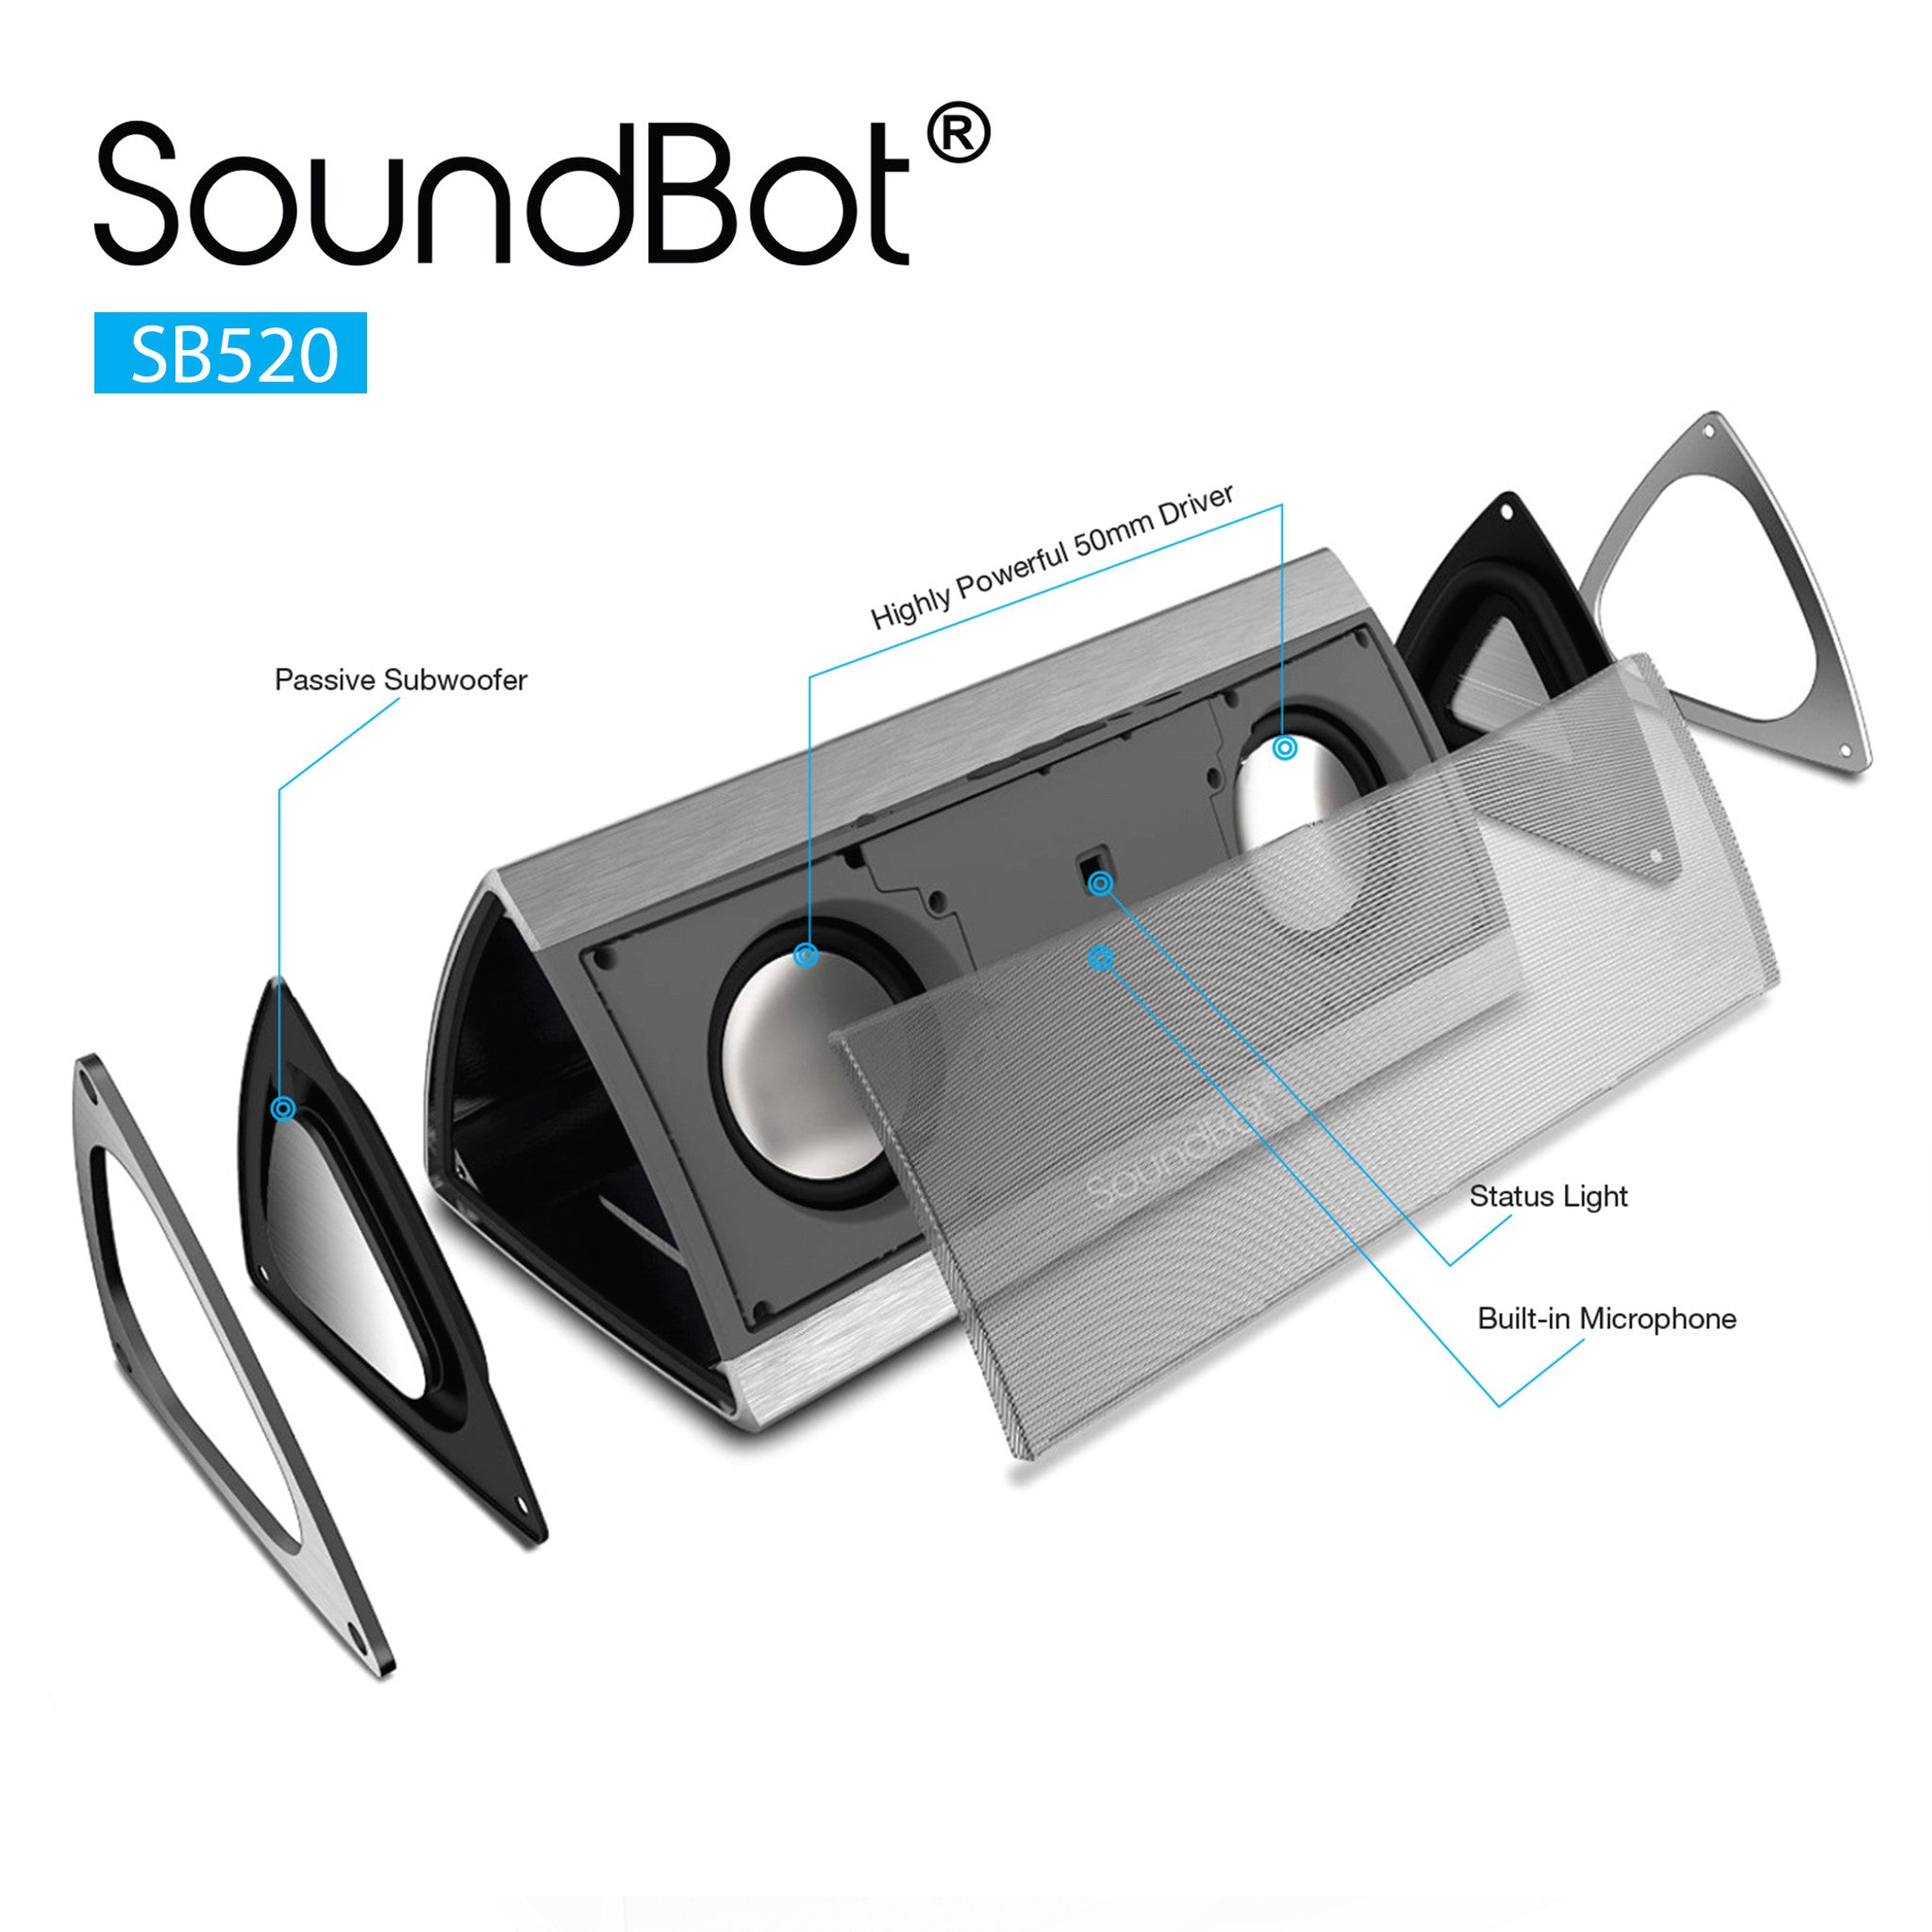 SoundBot® SB520 3D HD Bluetooth 4.0 Wireless Speaker for 15 hrs Music Streaming & Hands-Free Calling w/ Passive sub woofer, 5W + 5W 50mm Driver Speakerphone, Built-in Mic, 3.5mm Audio Port, 2200mAh Lithium-ion Rechargeable Battery for Indoor & Outdoor Use